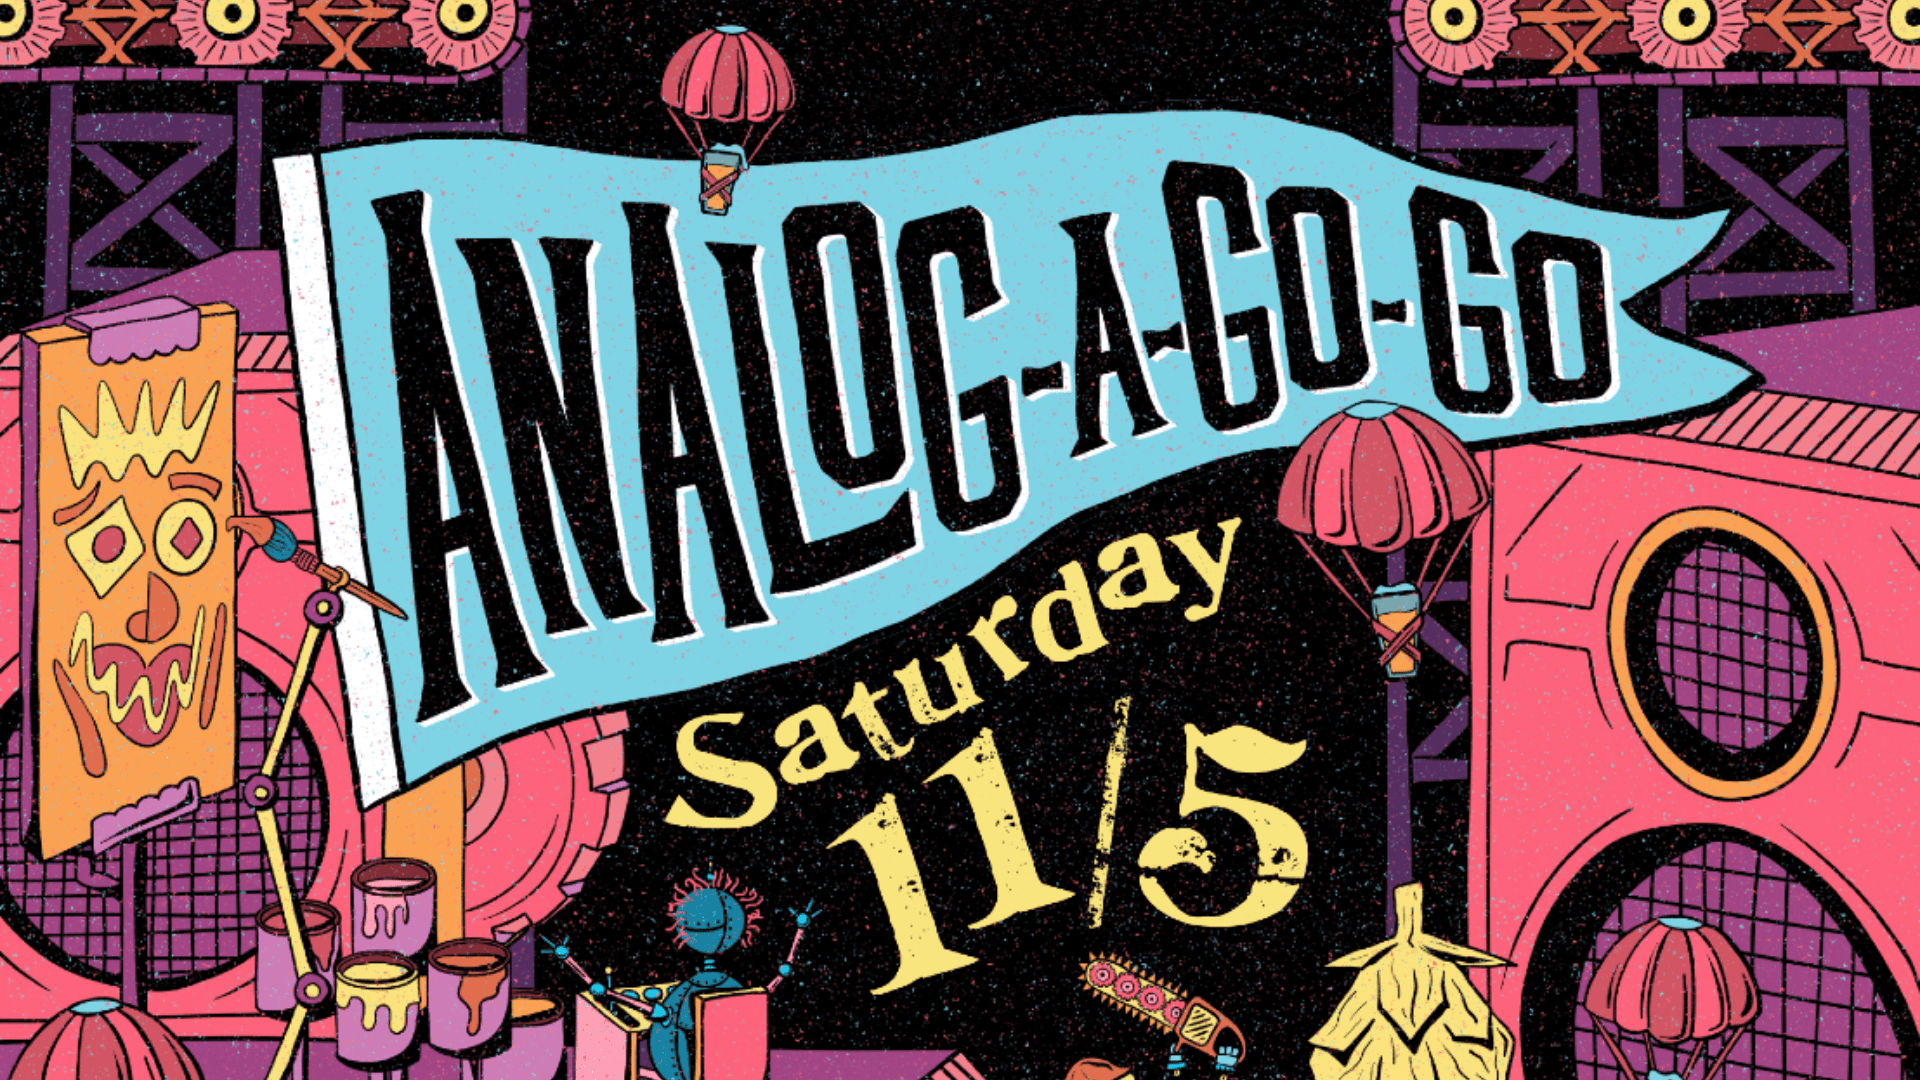 Featured image for “Dogfish’s Analog-A-Go-Go festival back after 2-year hiatus”